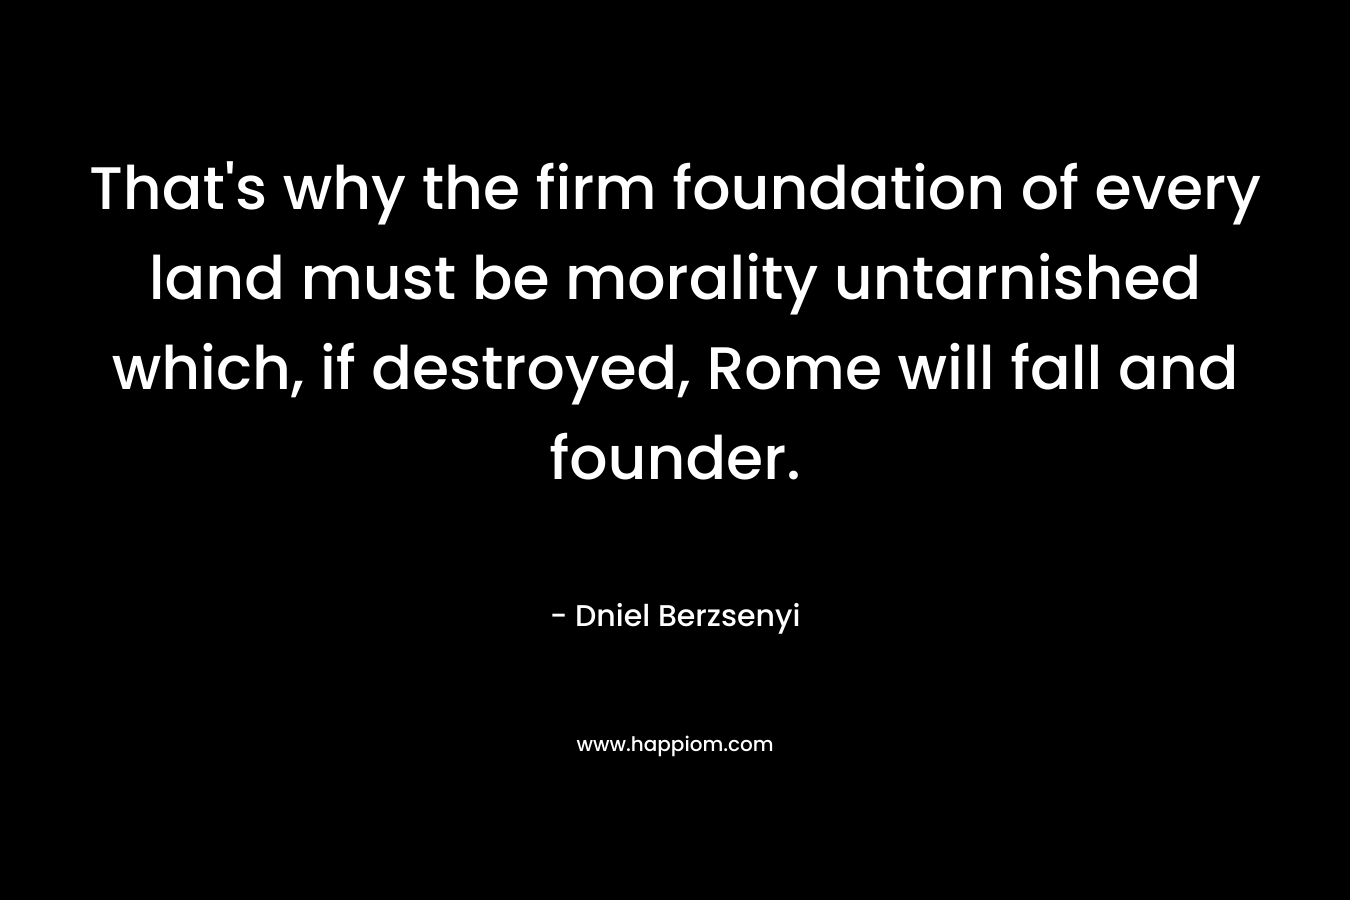 That's why the firm foundation of every land must be morality untarnished which, if destroyed, Rome will fall and founder.